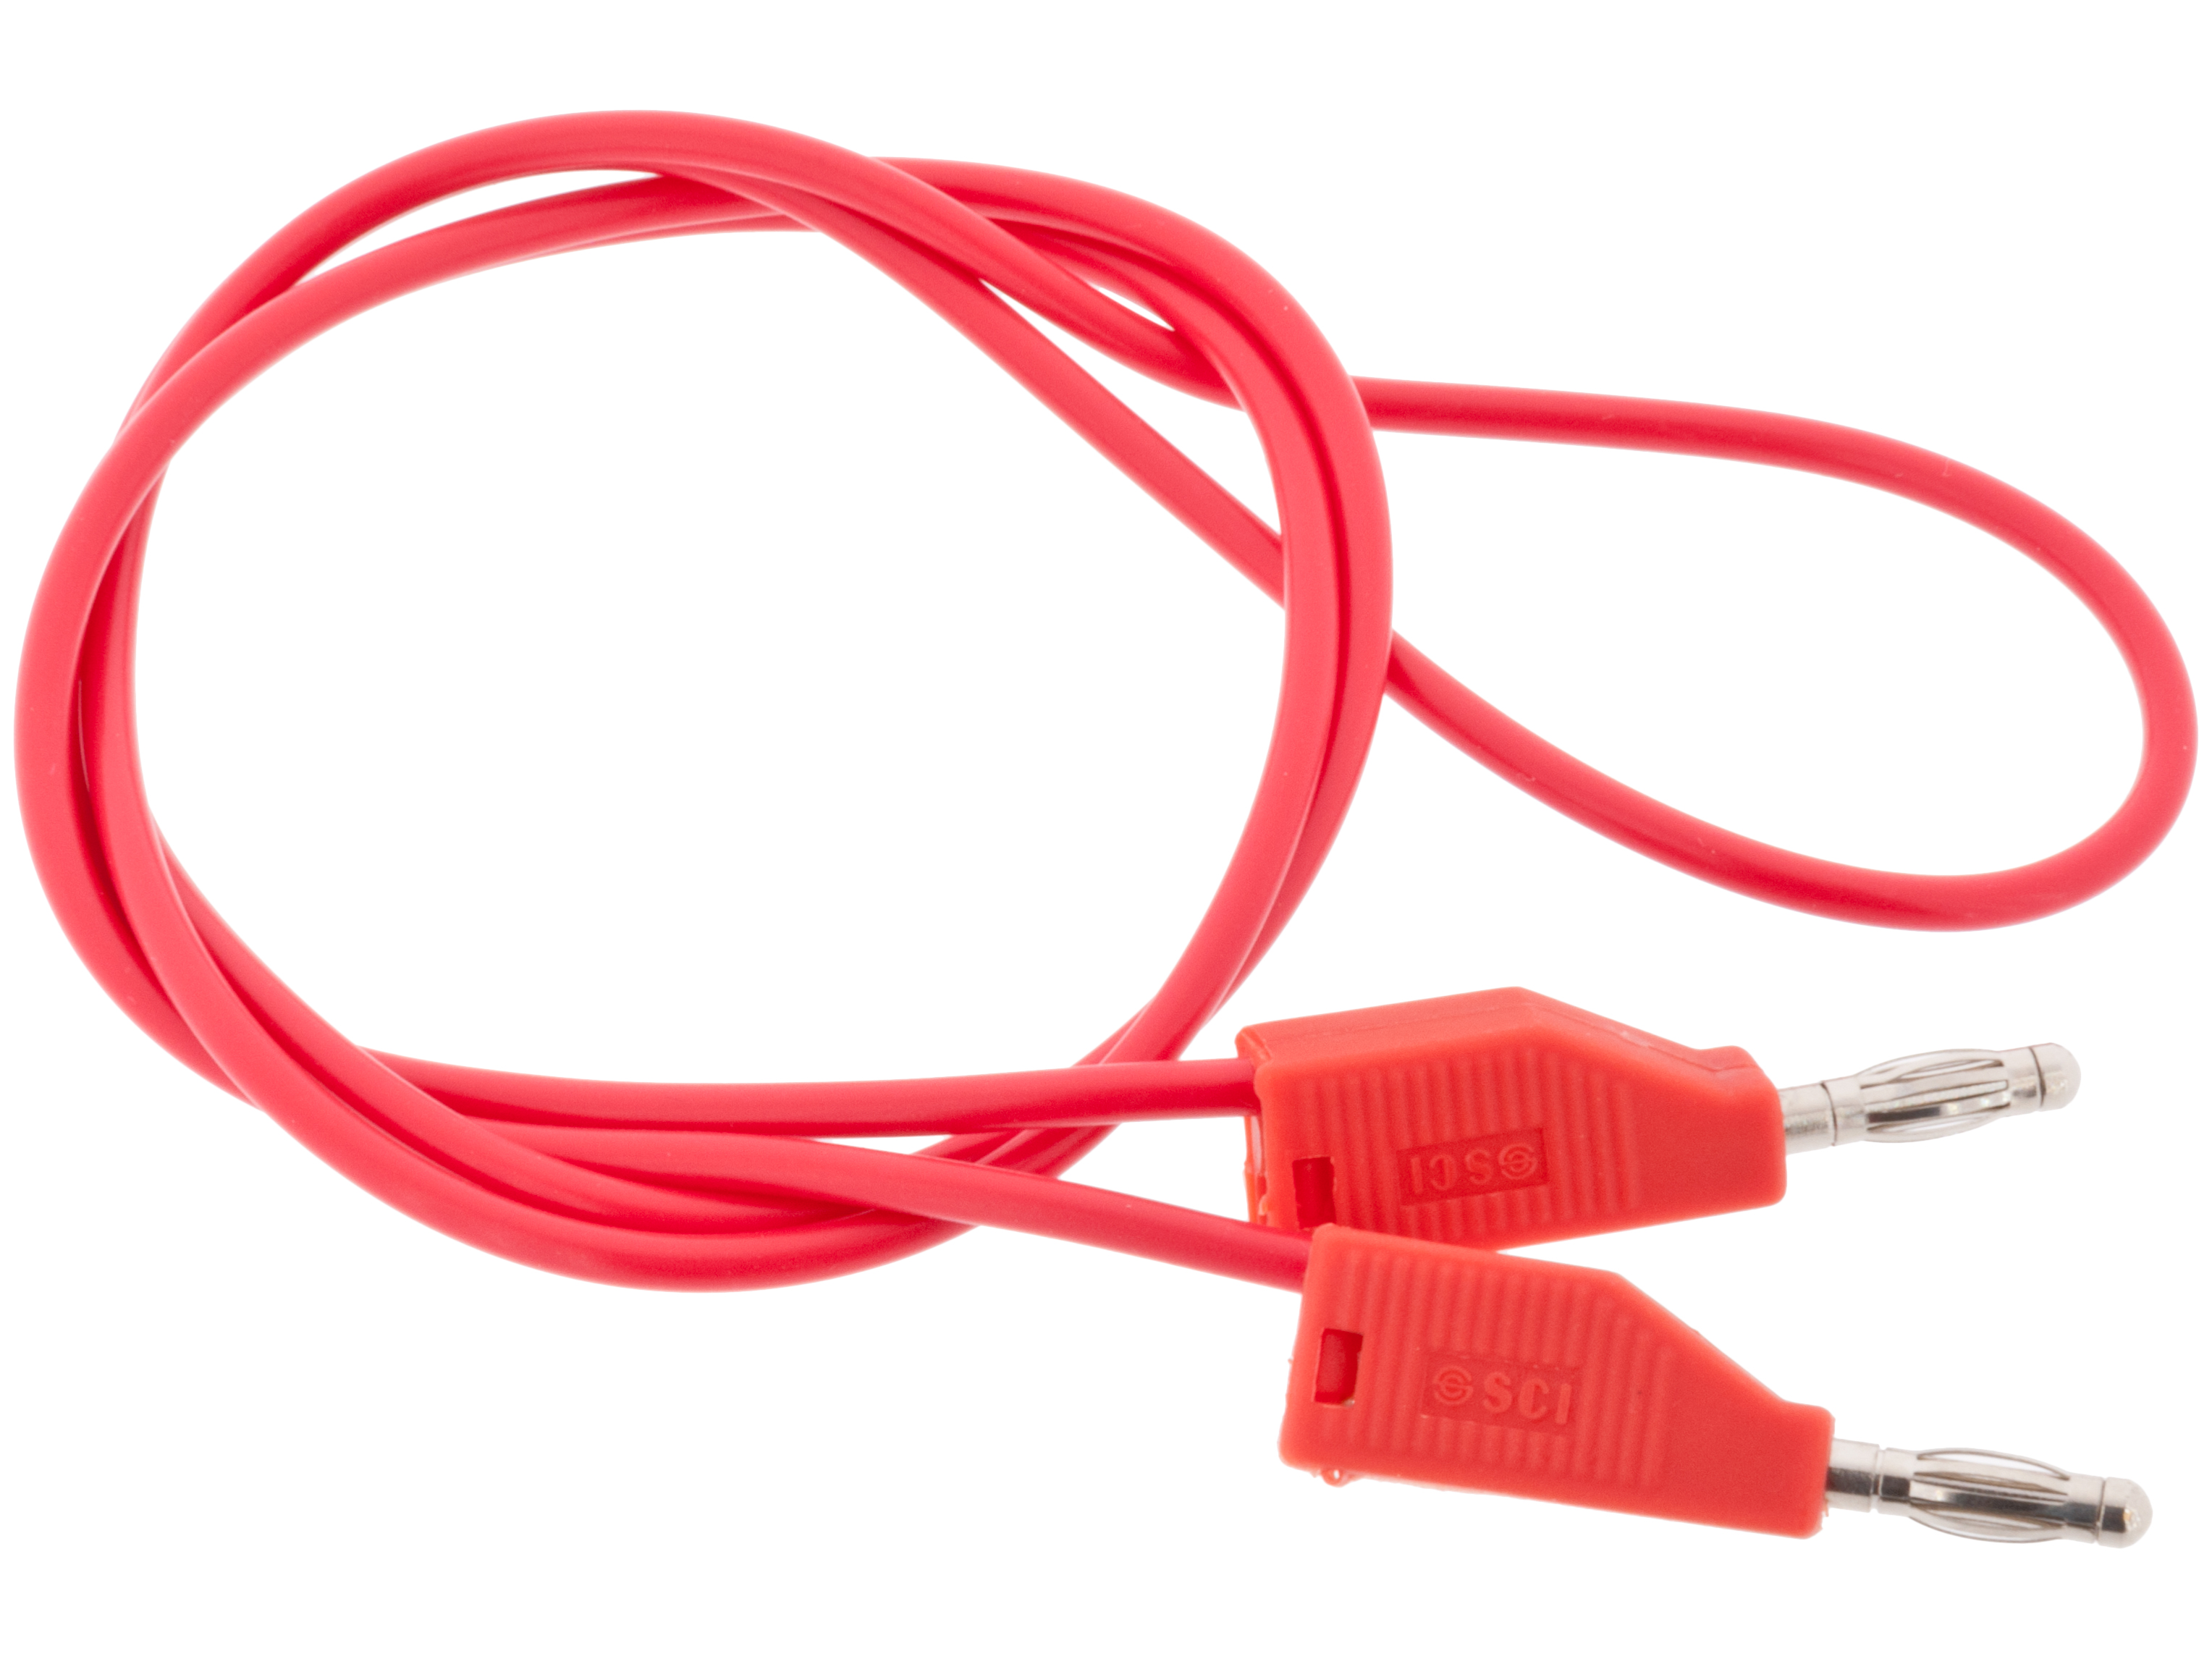 BANANA Cable Red 50cm